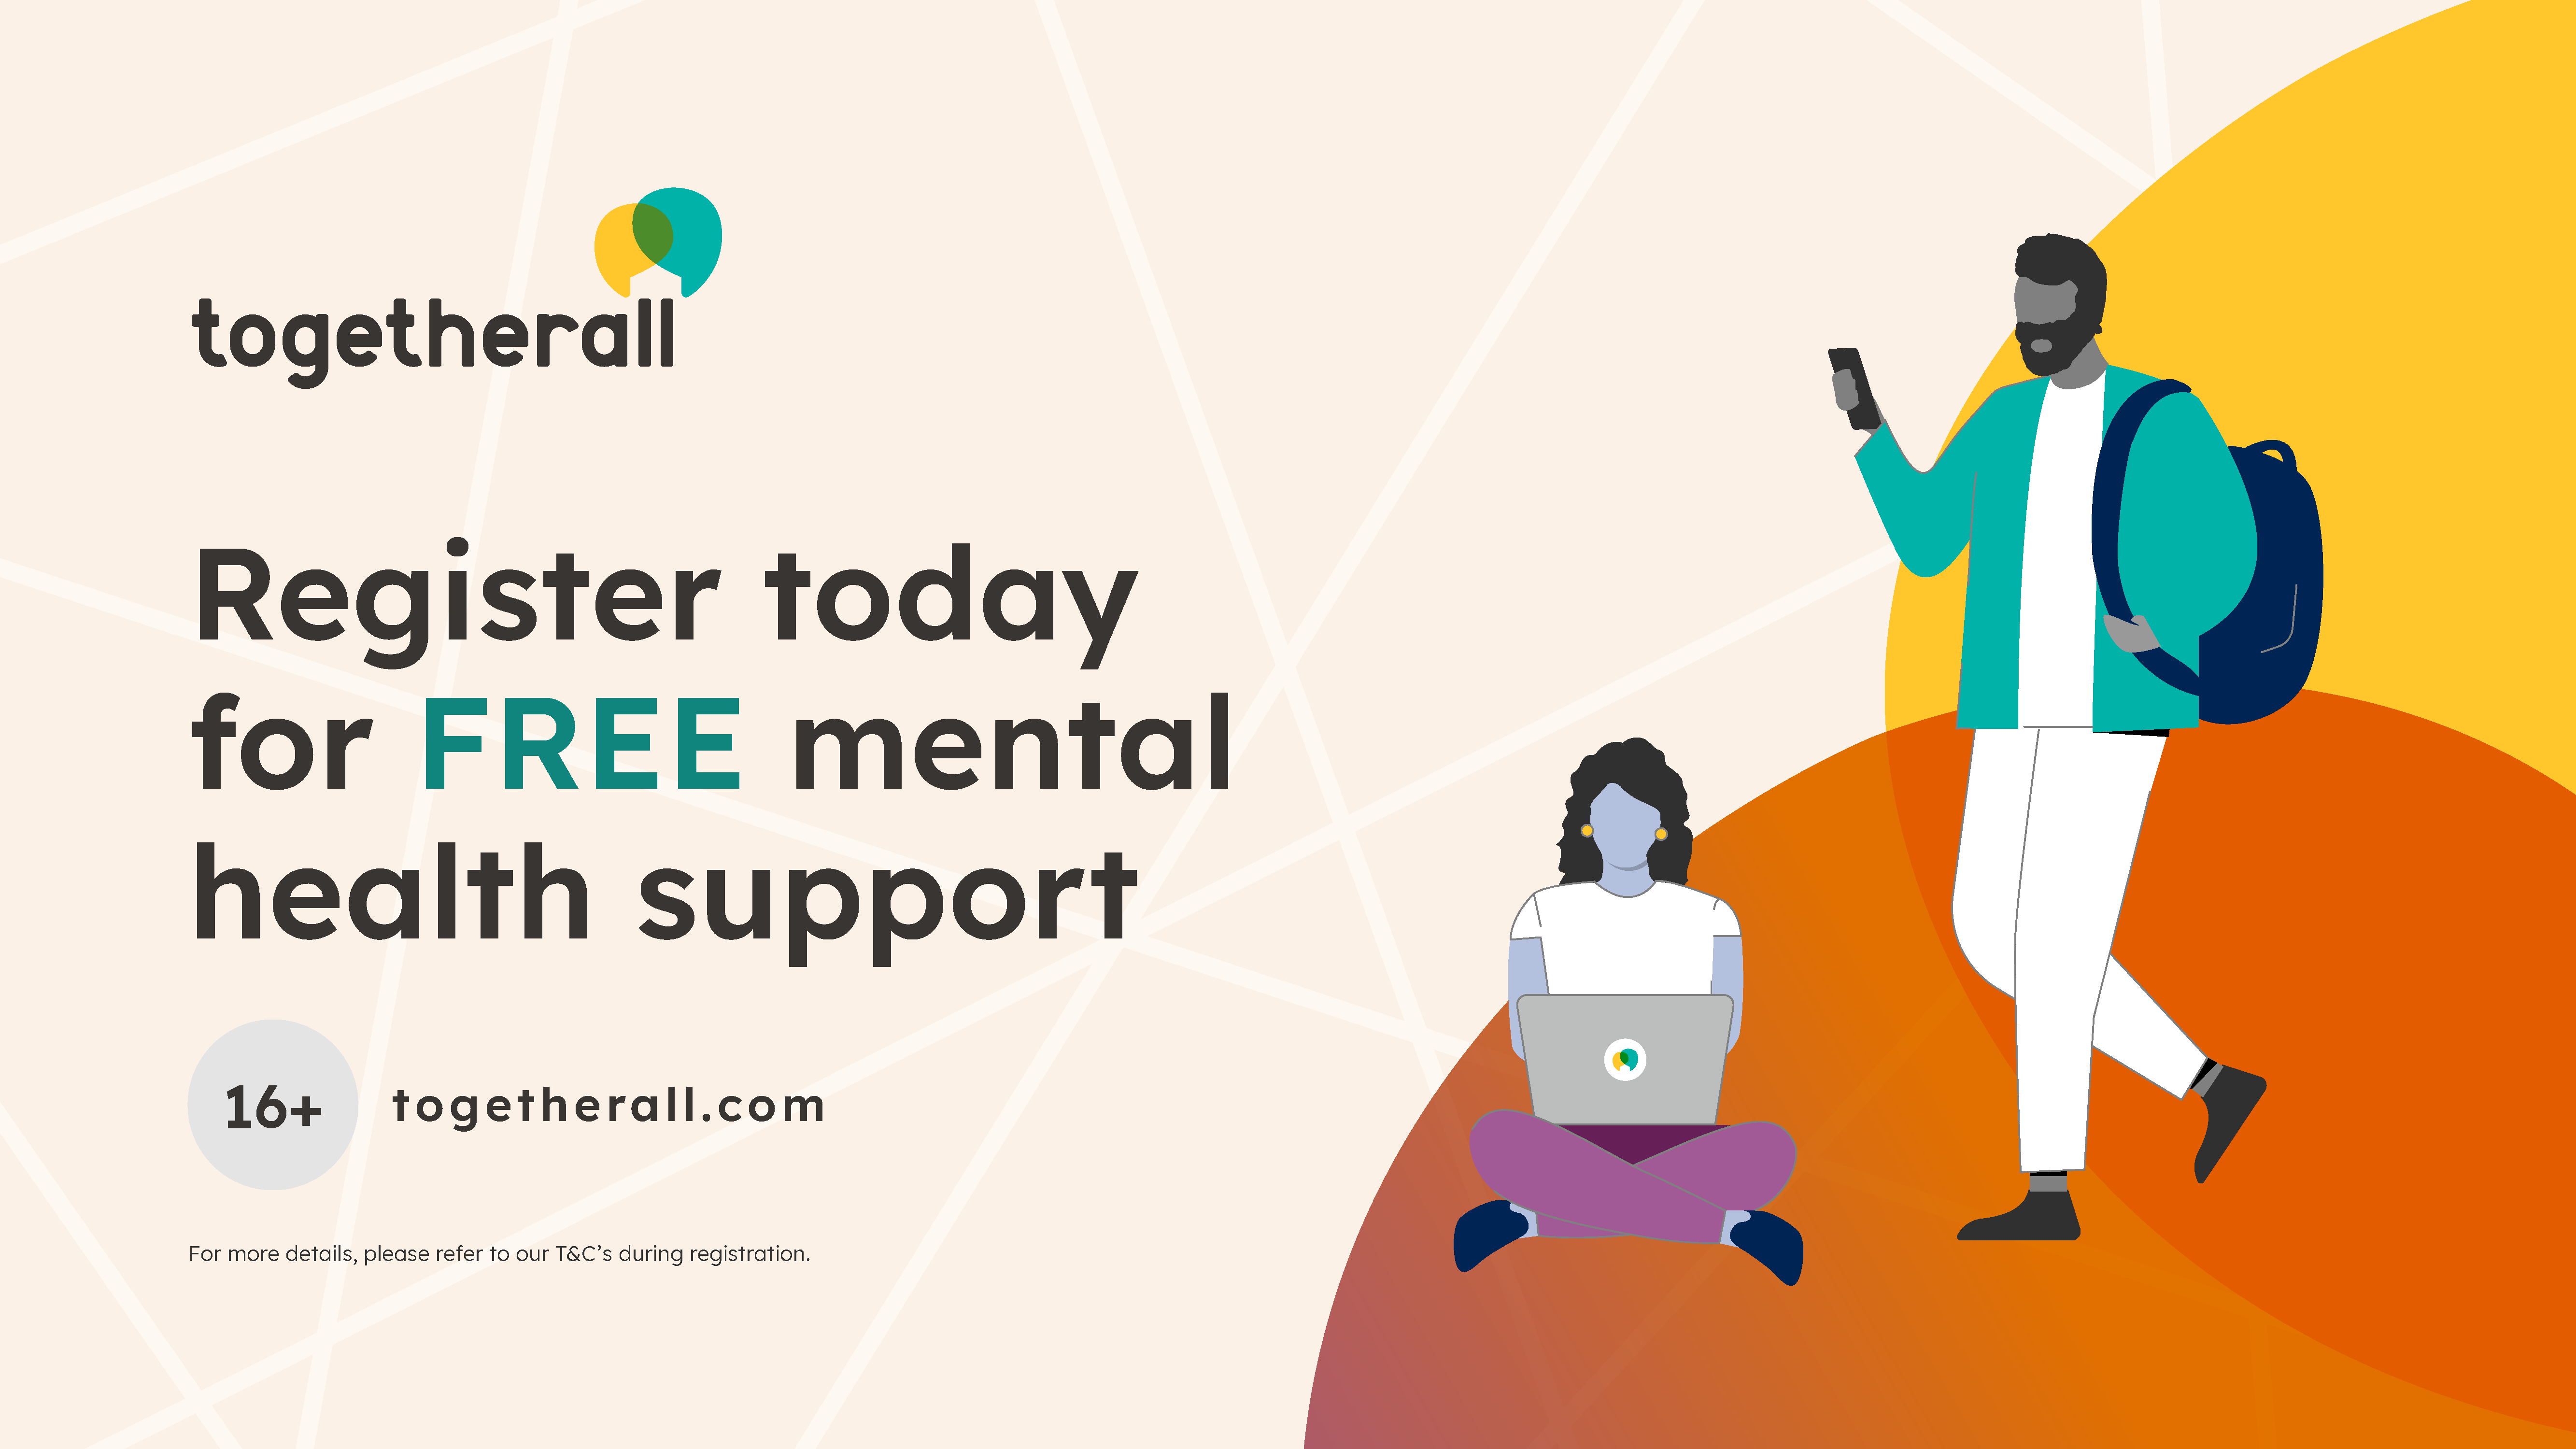 Togetherall peer counseling resource for students